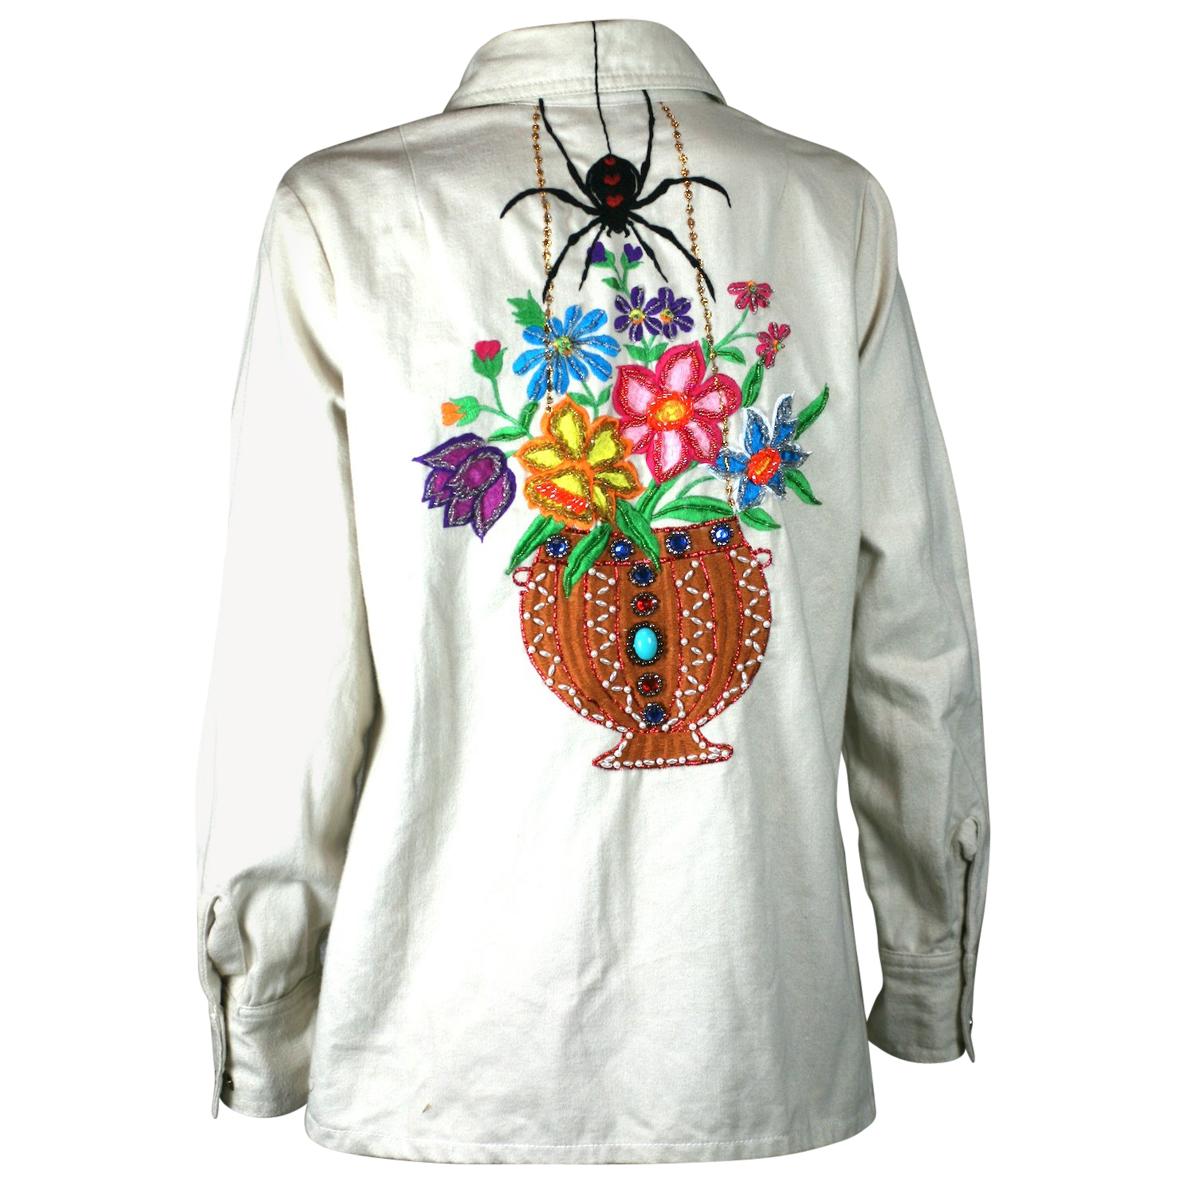 Black Widow Embroidered Cotton Shirt, Upcycled by Studio VL For Sale